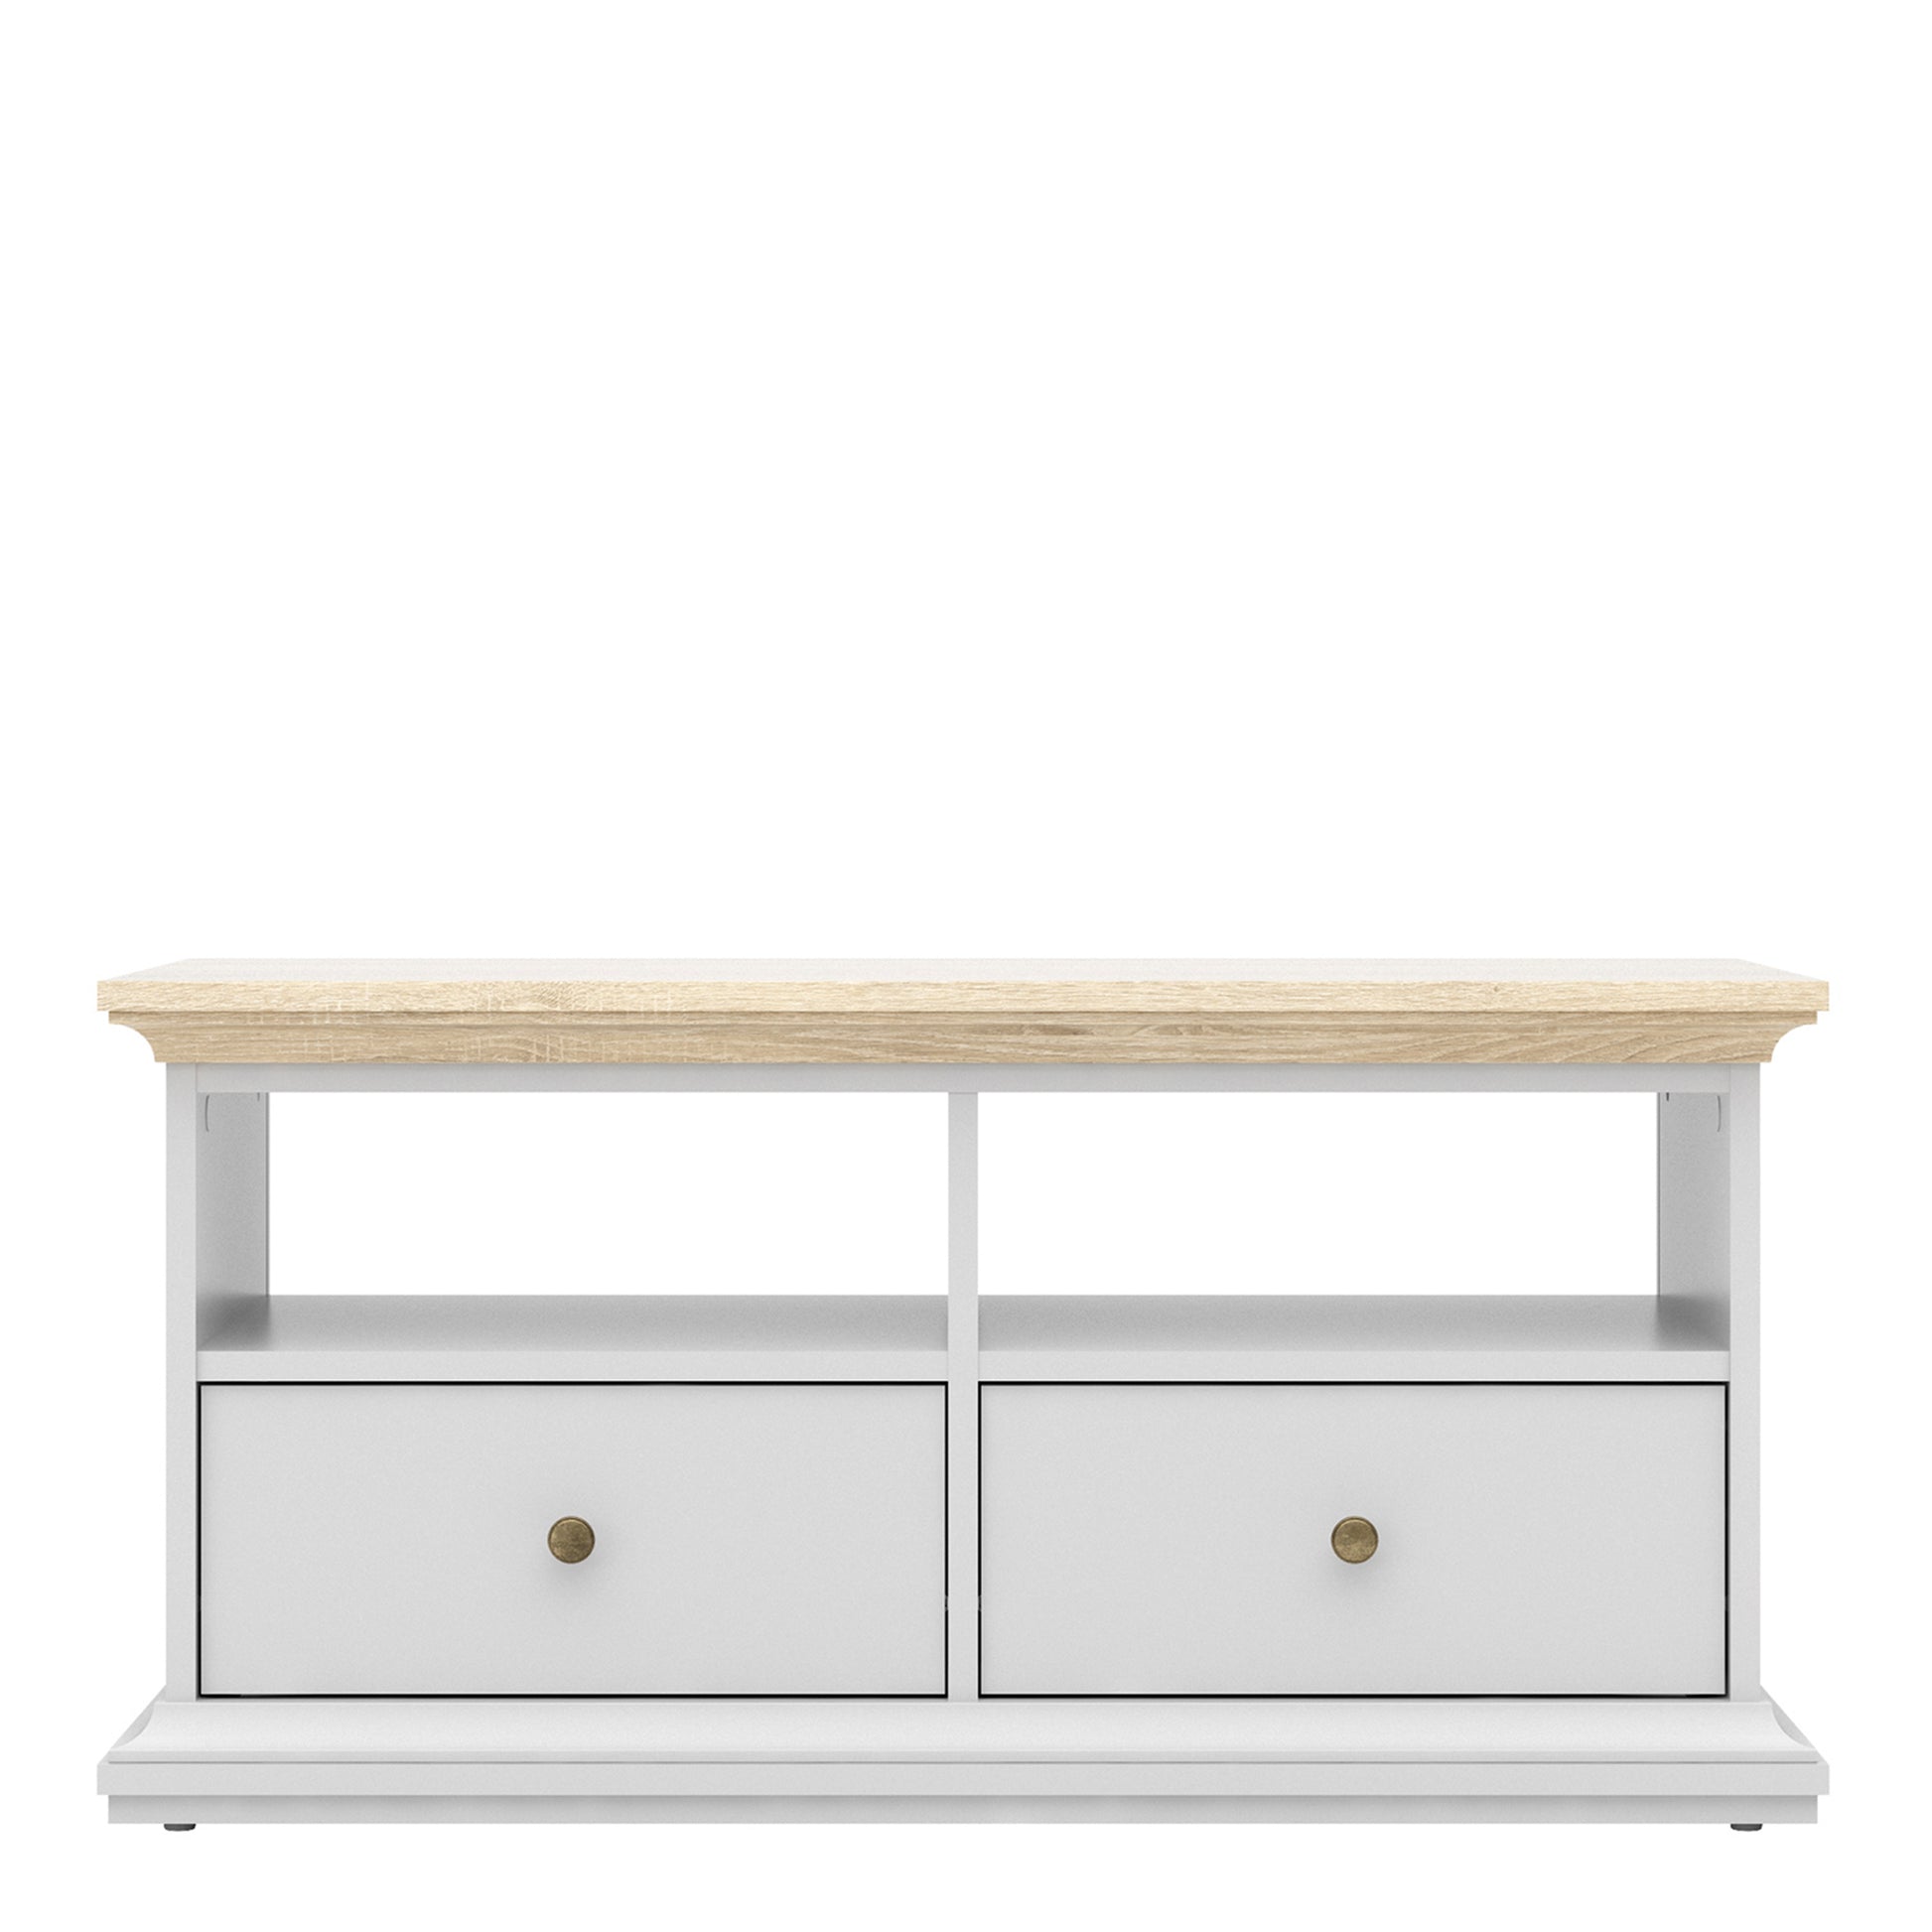 Paris  TV Unit - 2 Shelves 2 Drawers in White and Oak